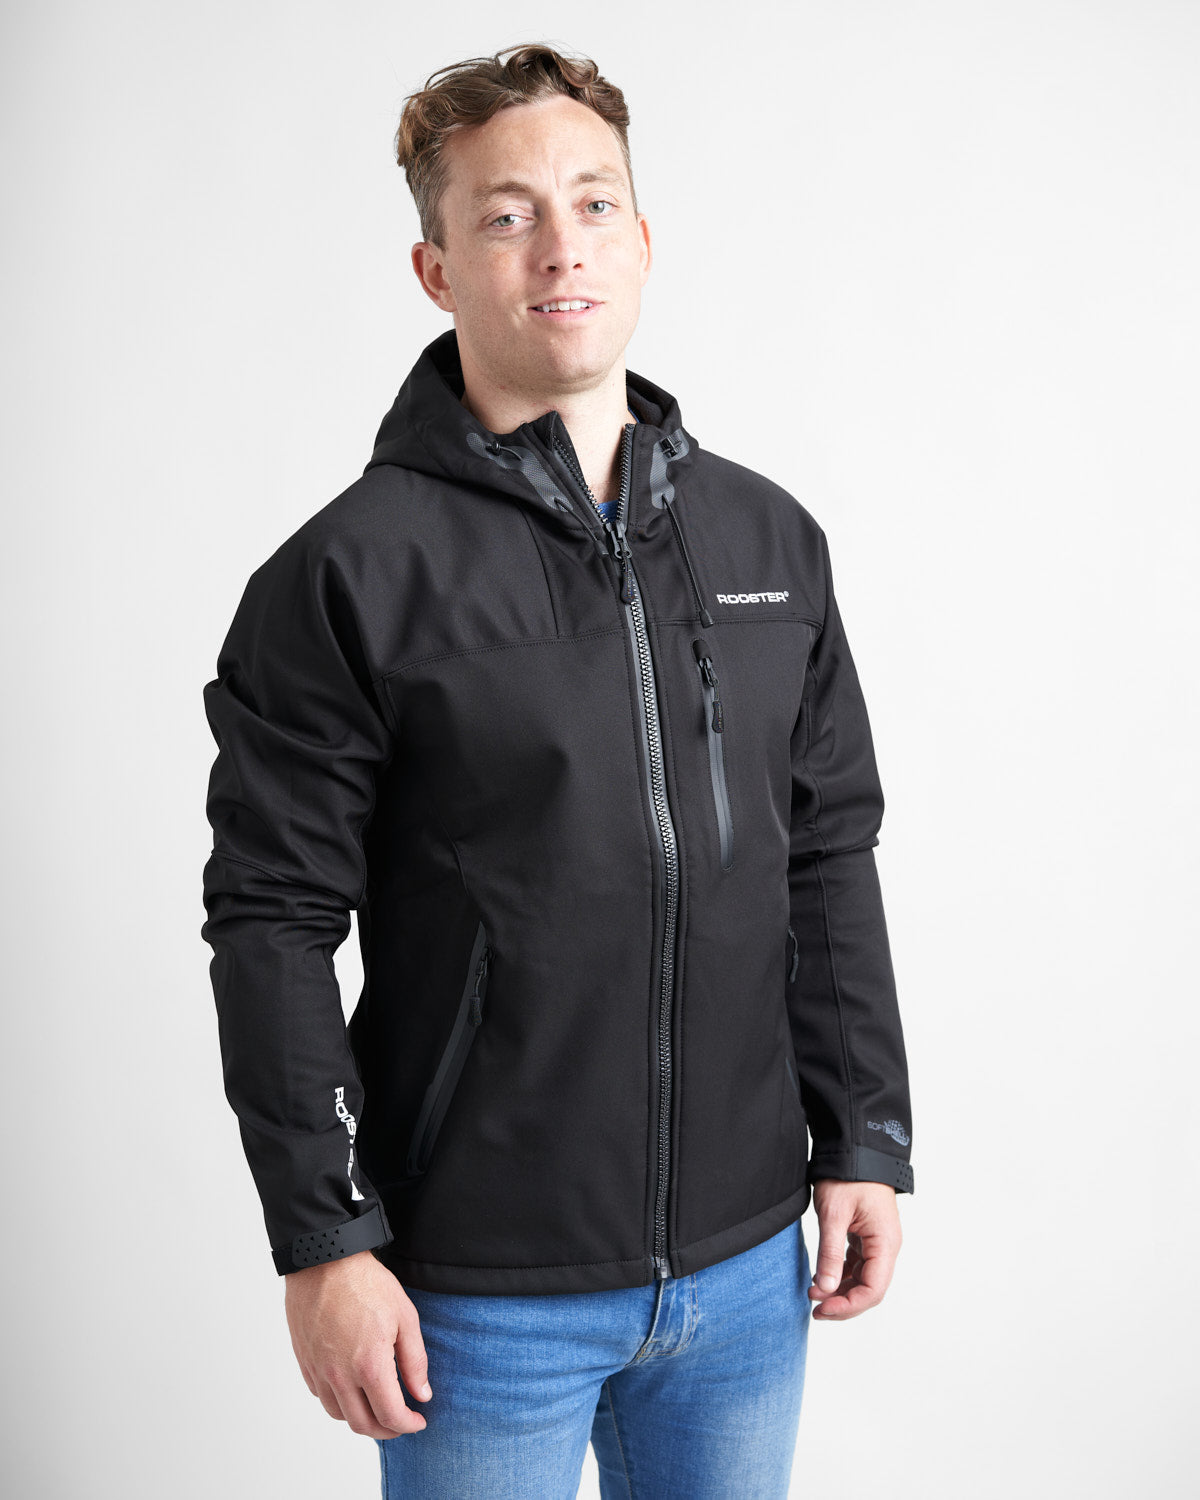 Rooster Unisex Soft Shell Jacket with Hood